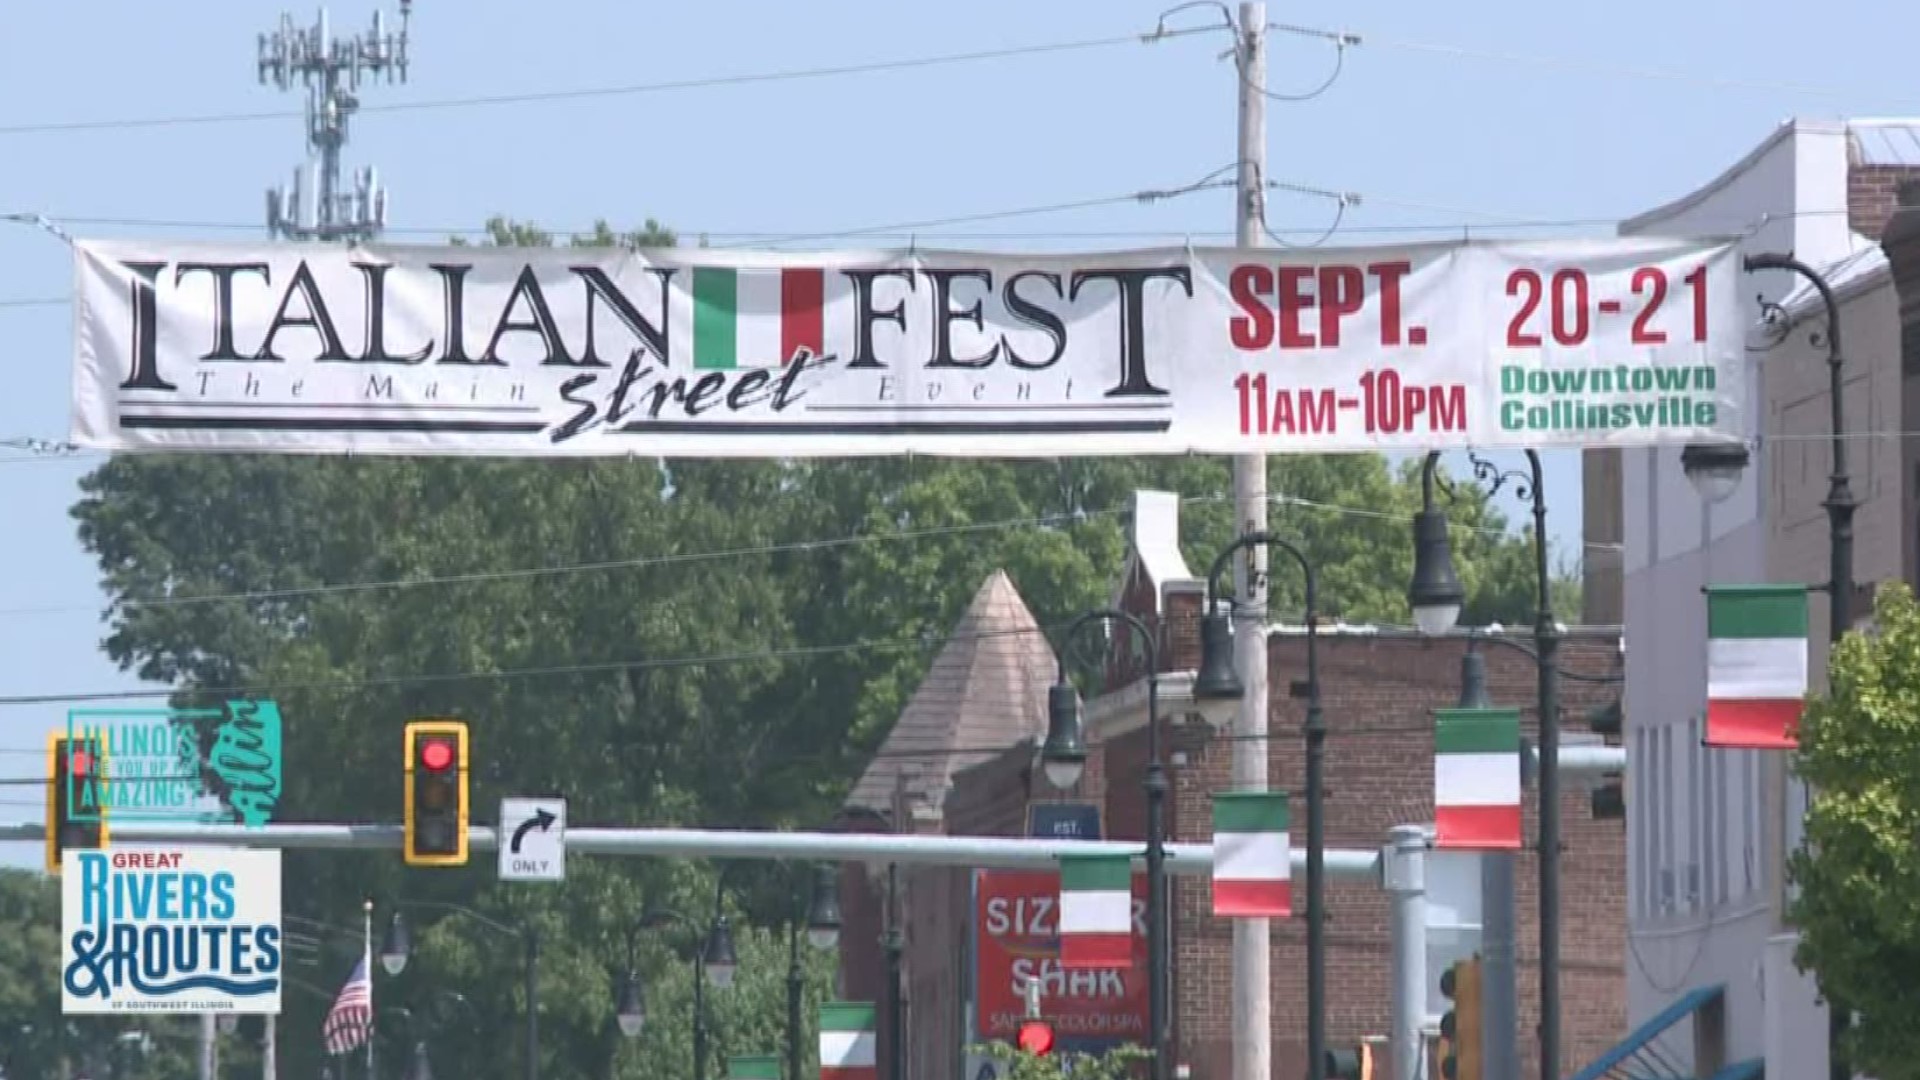 There is plenty to do in Collinsville, IL, including the Italian Fest on Friday and Saturday!